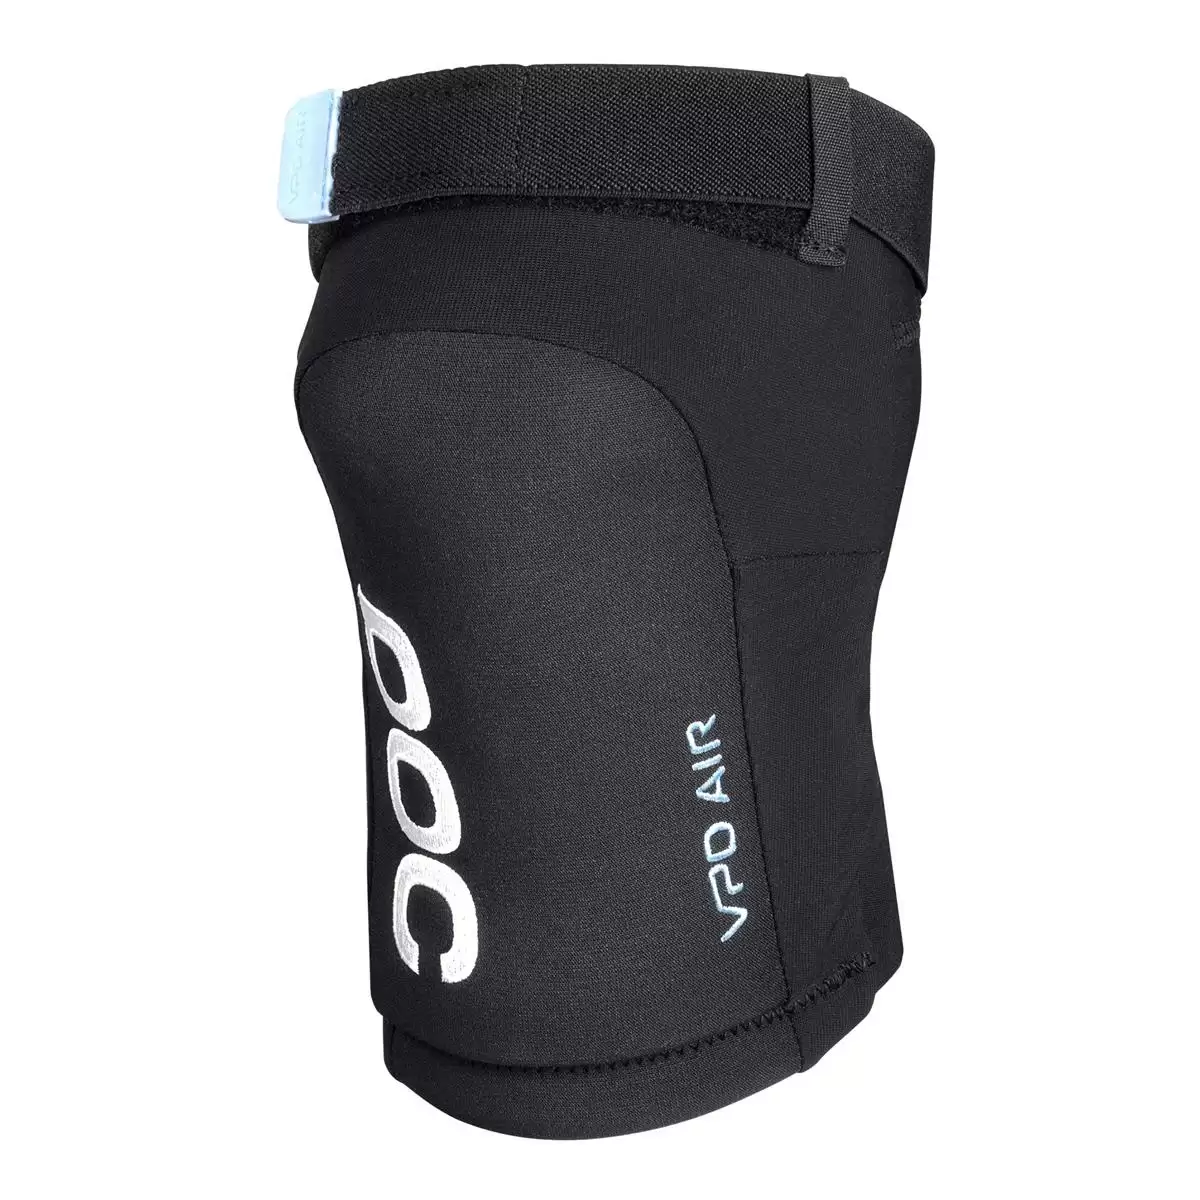 Joint VPD Air Knee pads black Size L #1